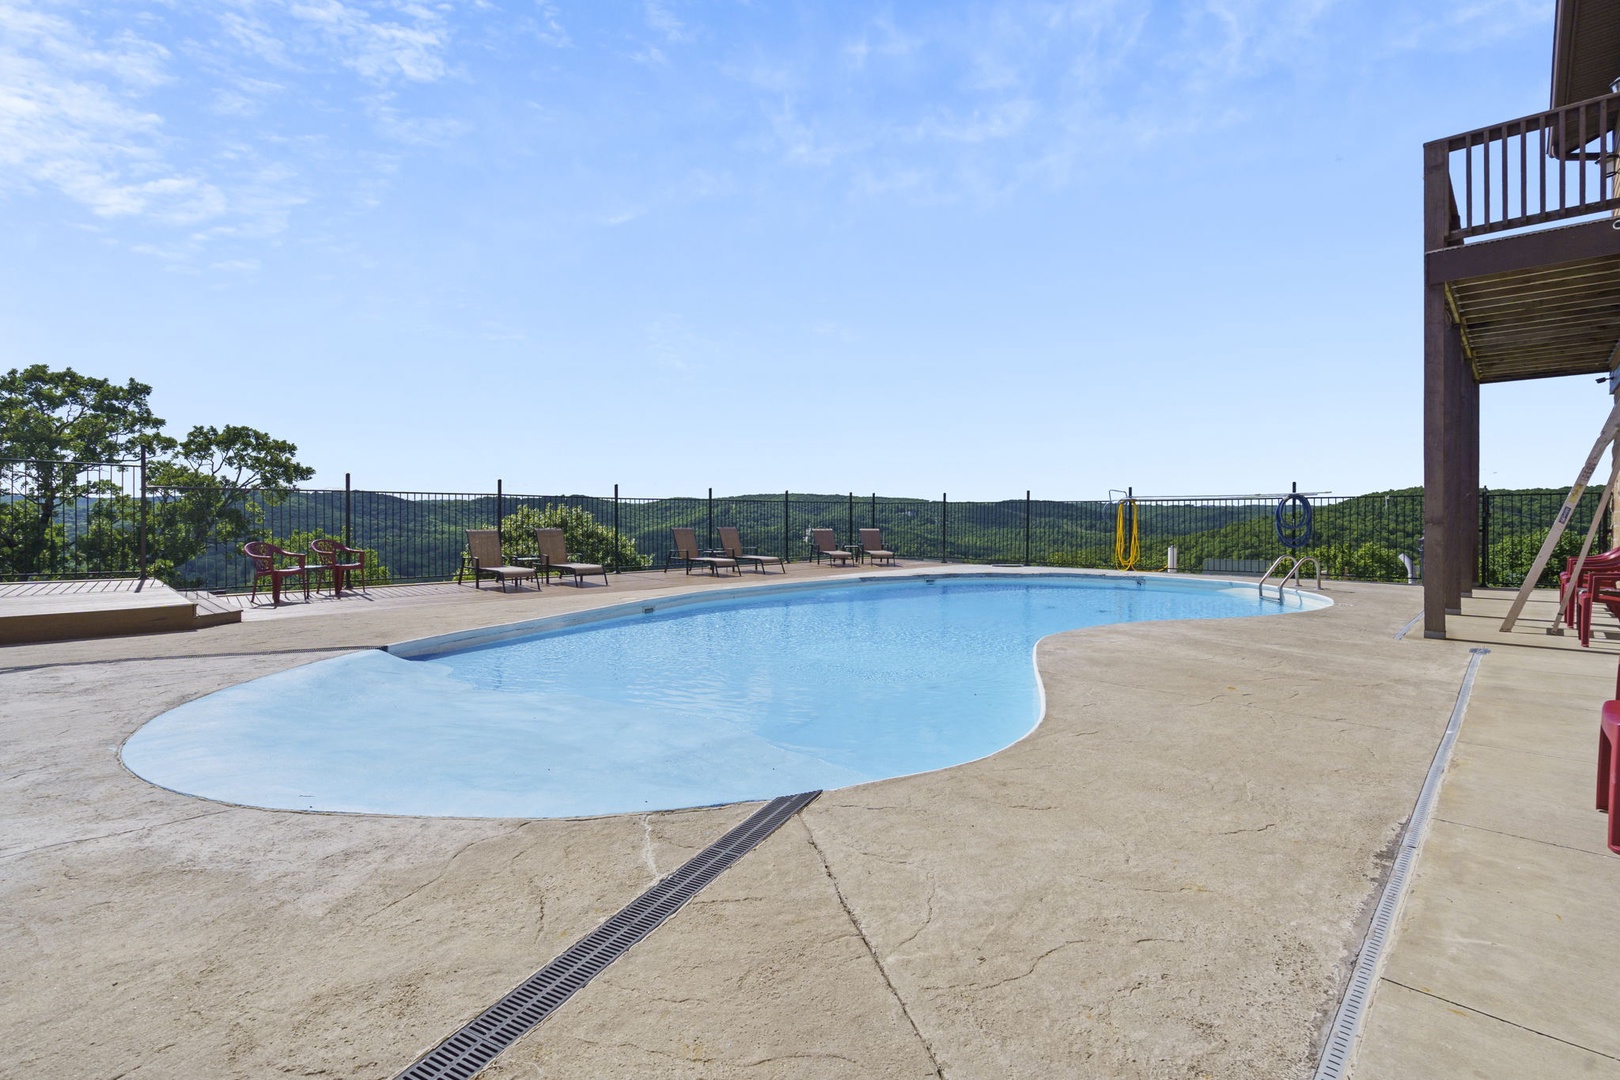 Outdoor pool at The Landing at Eagles Nest